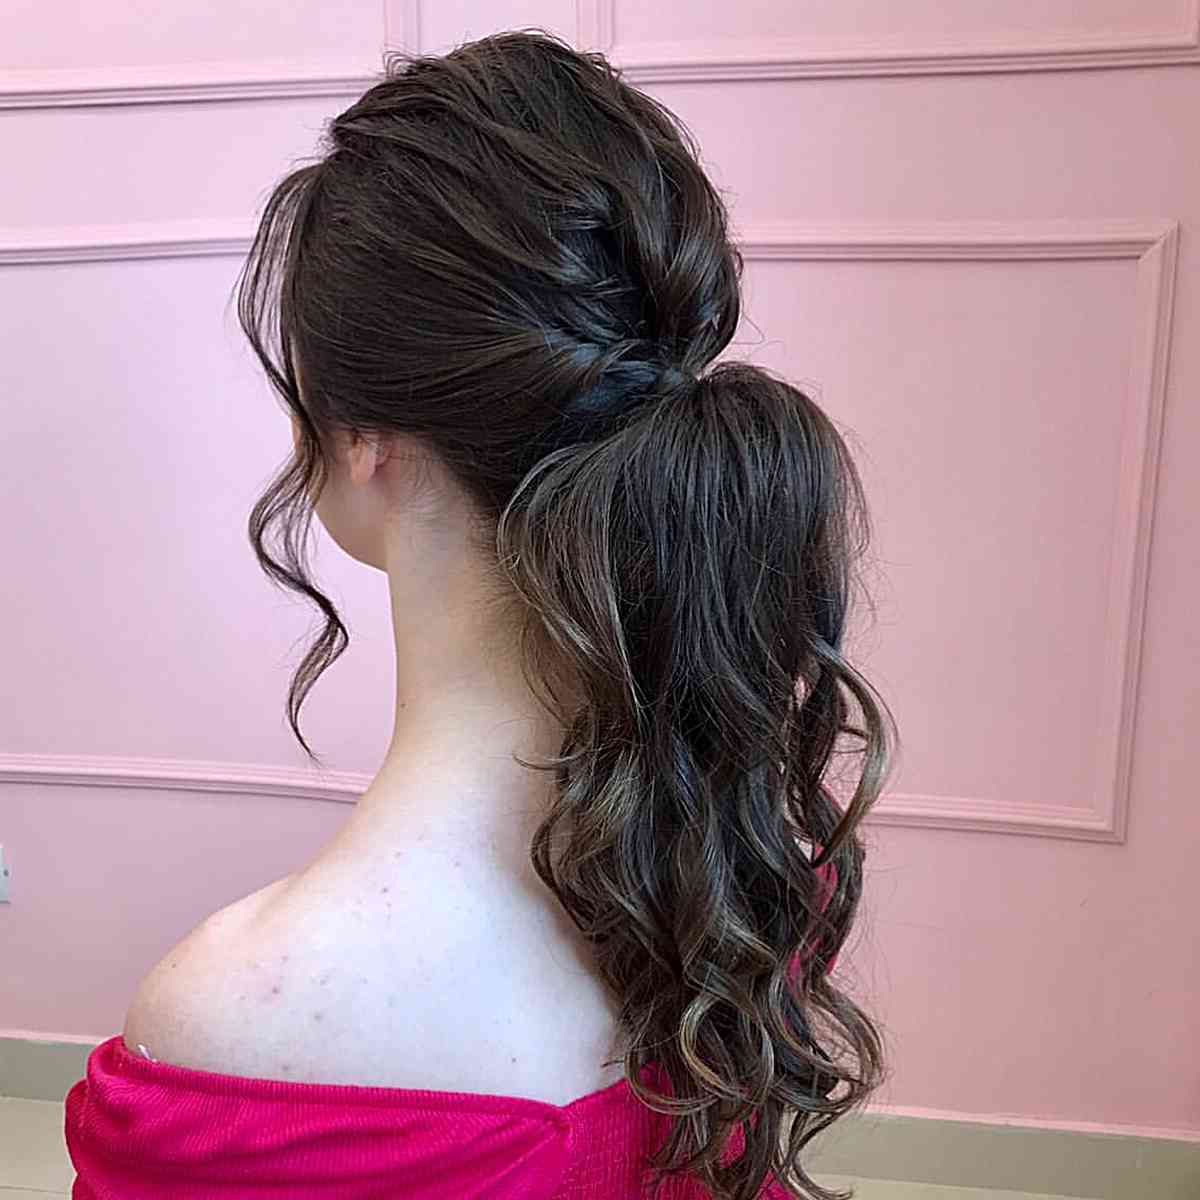 33 Cutest Prom Ponytail Hairstyles That Are Easy To Do! Within Most Recent Ponytail Updo Hairstyles For Medium Hair (View 26 of 36)